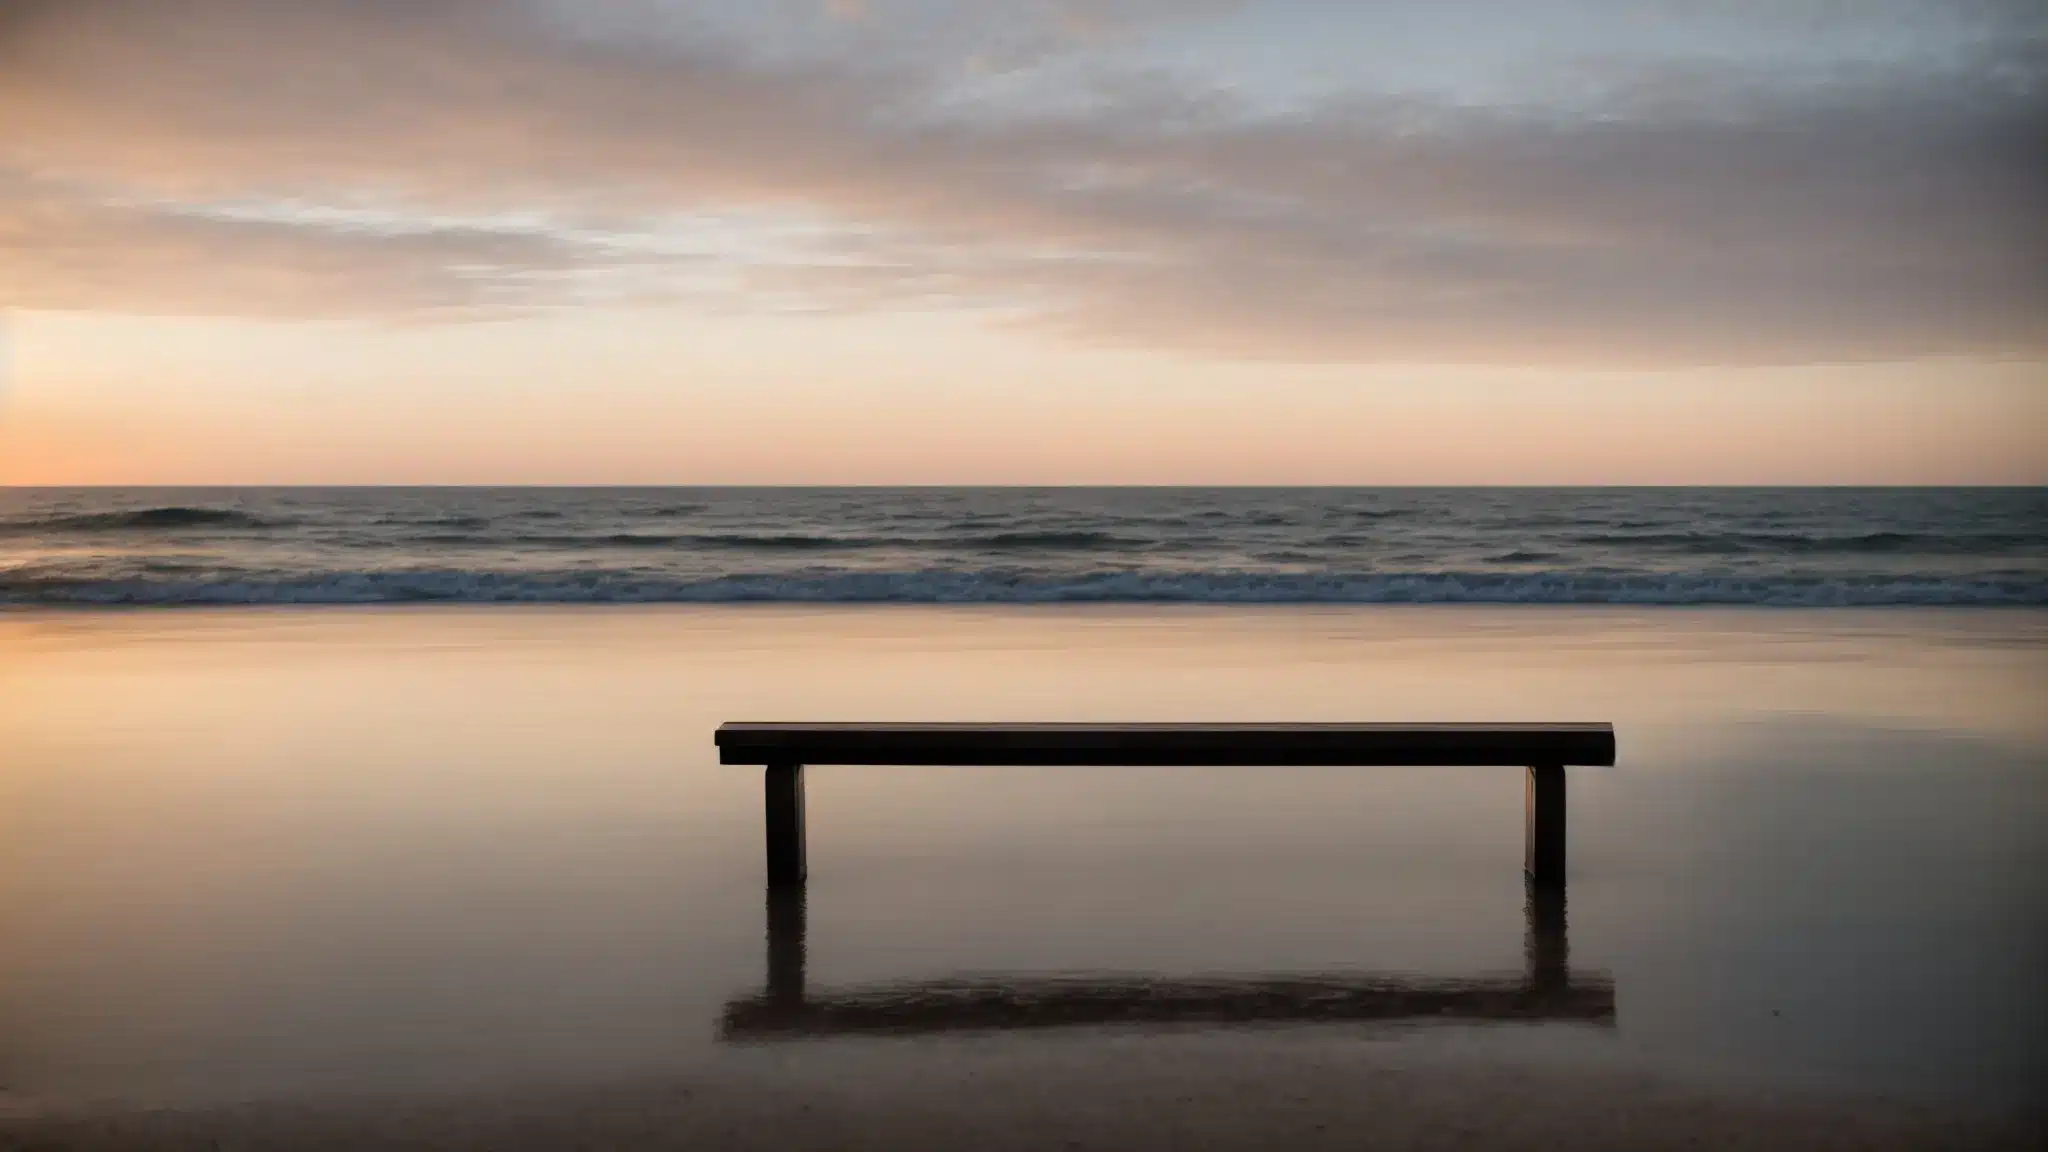 a sunrise breaks over an empty bench facing a calm sea, symbolizing a new beginning and the quiet contemplation of renewal amidst uncertainty.